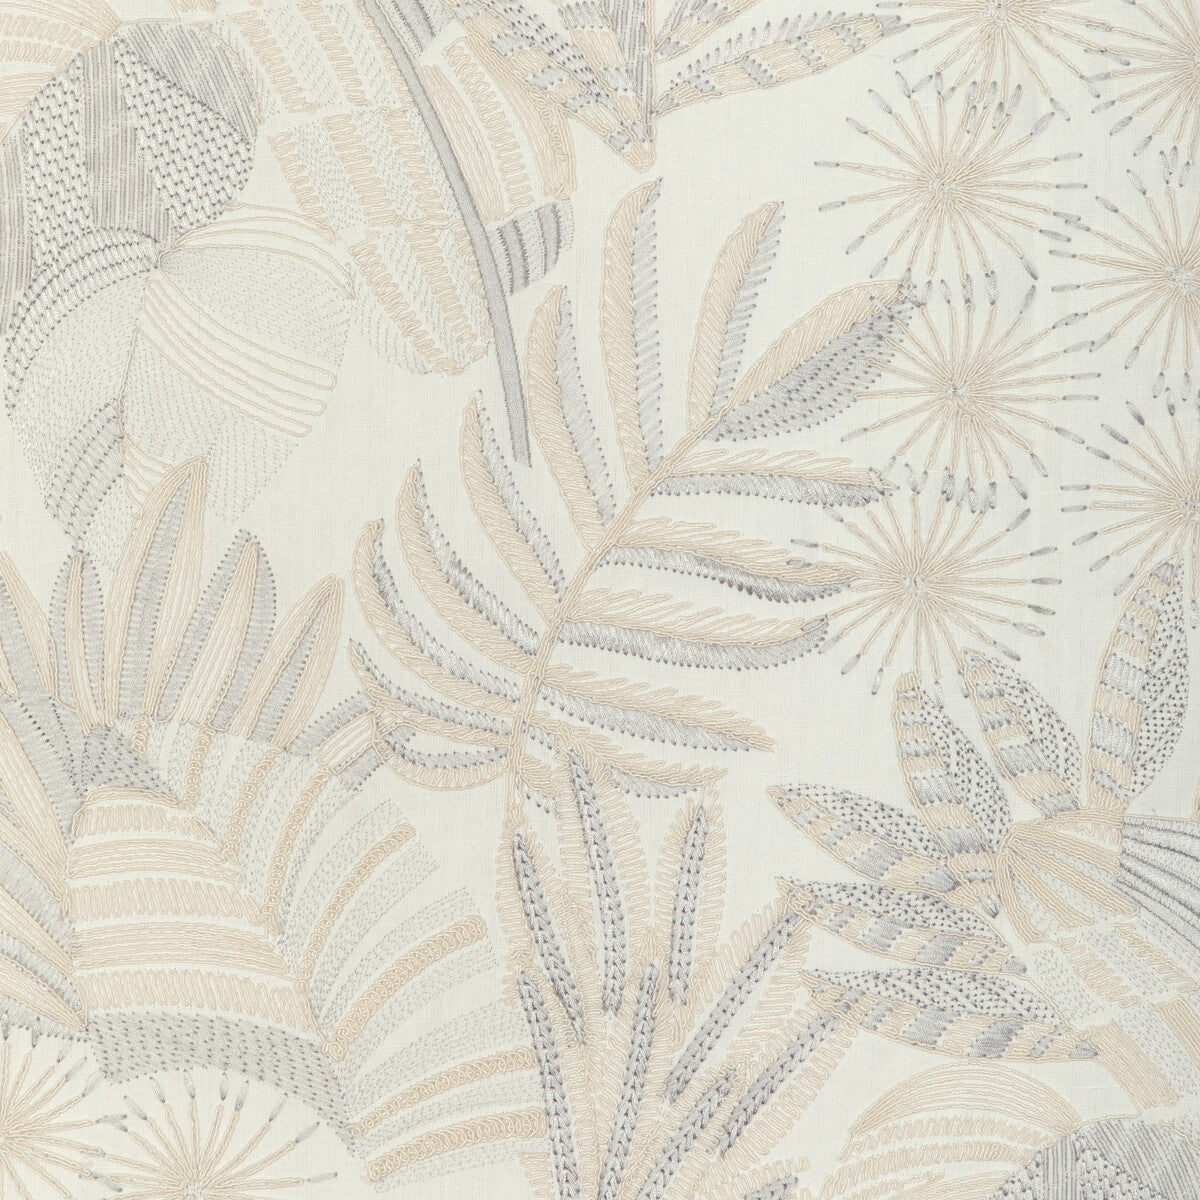 Marajo fabric in cornflower color - pattern 37249.15.0 - by Kravet Couture in the Casa Botanica collection